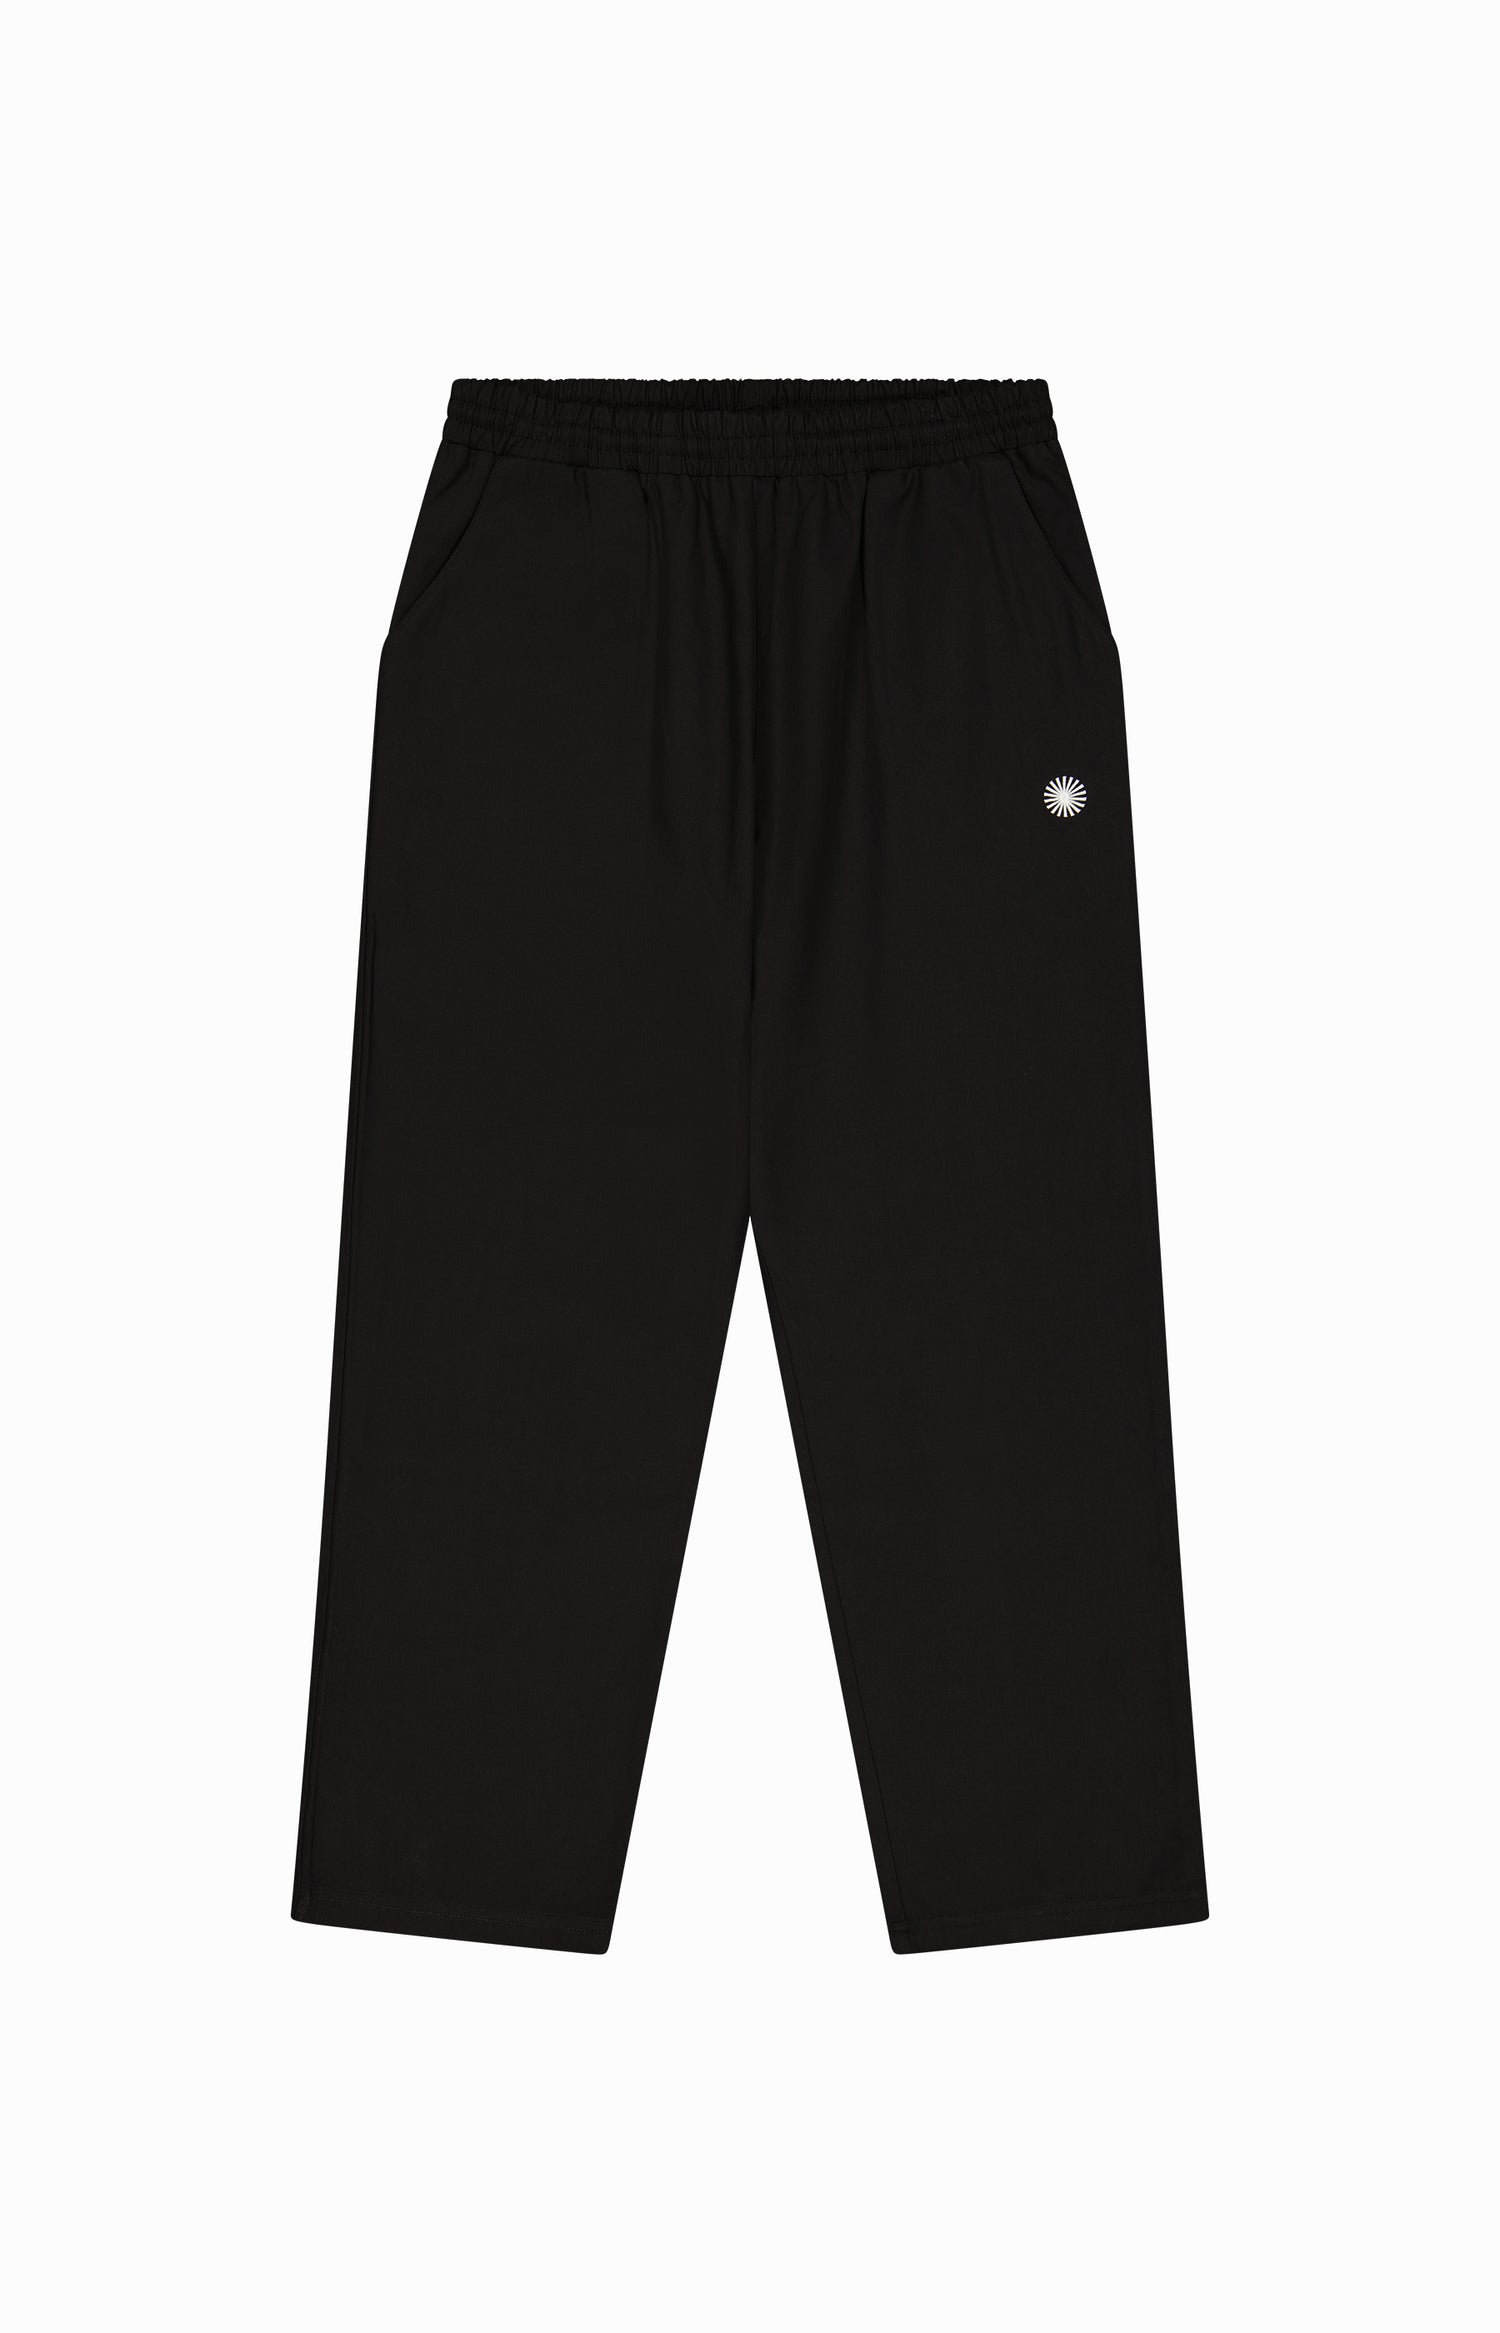 front of black pants with small sun logo, two pockets and elastic waistband